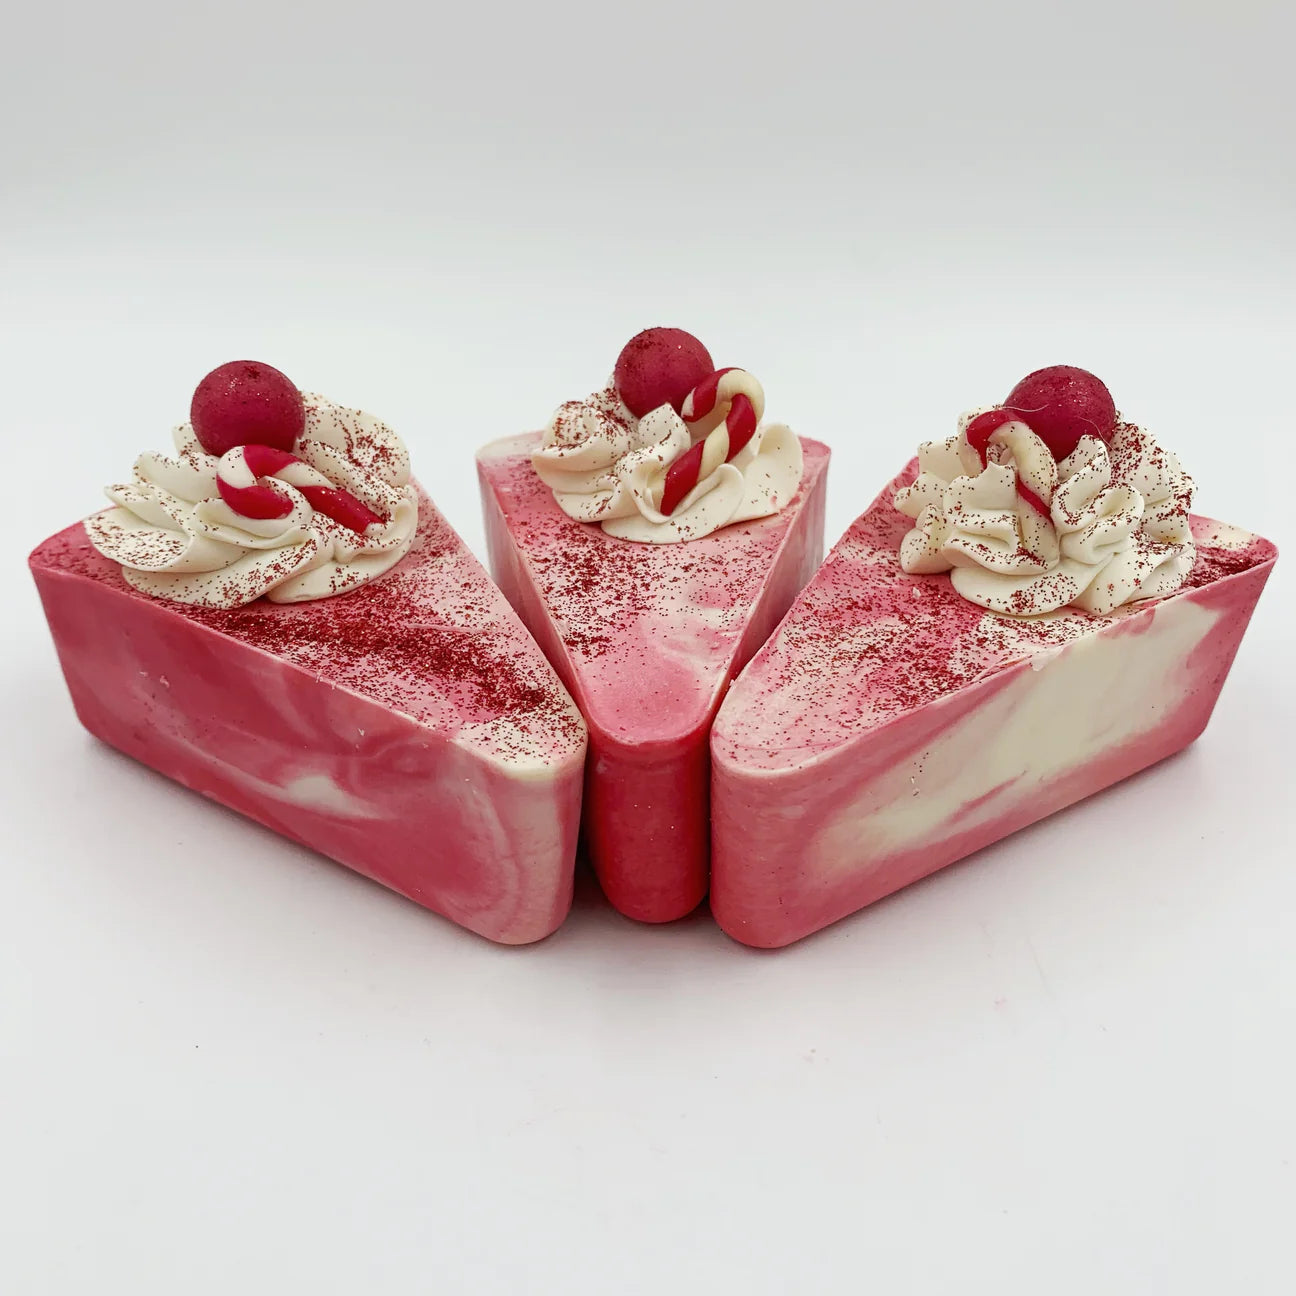 Candy Cane Pie Soap